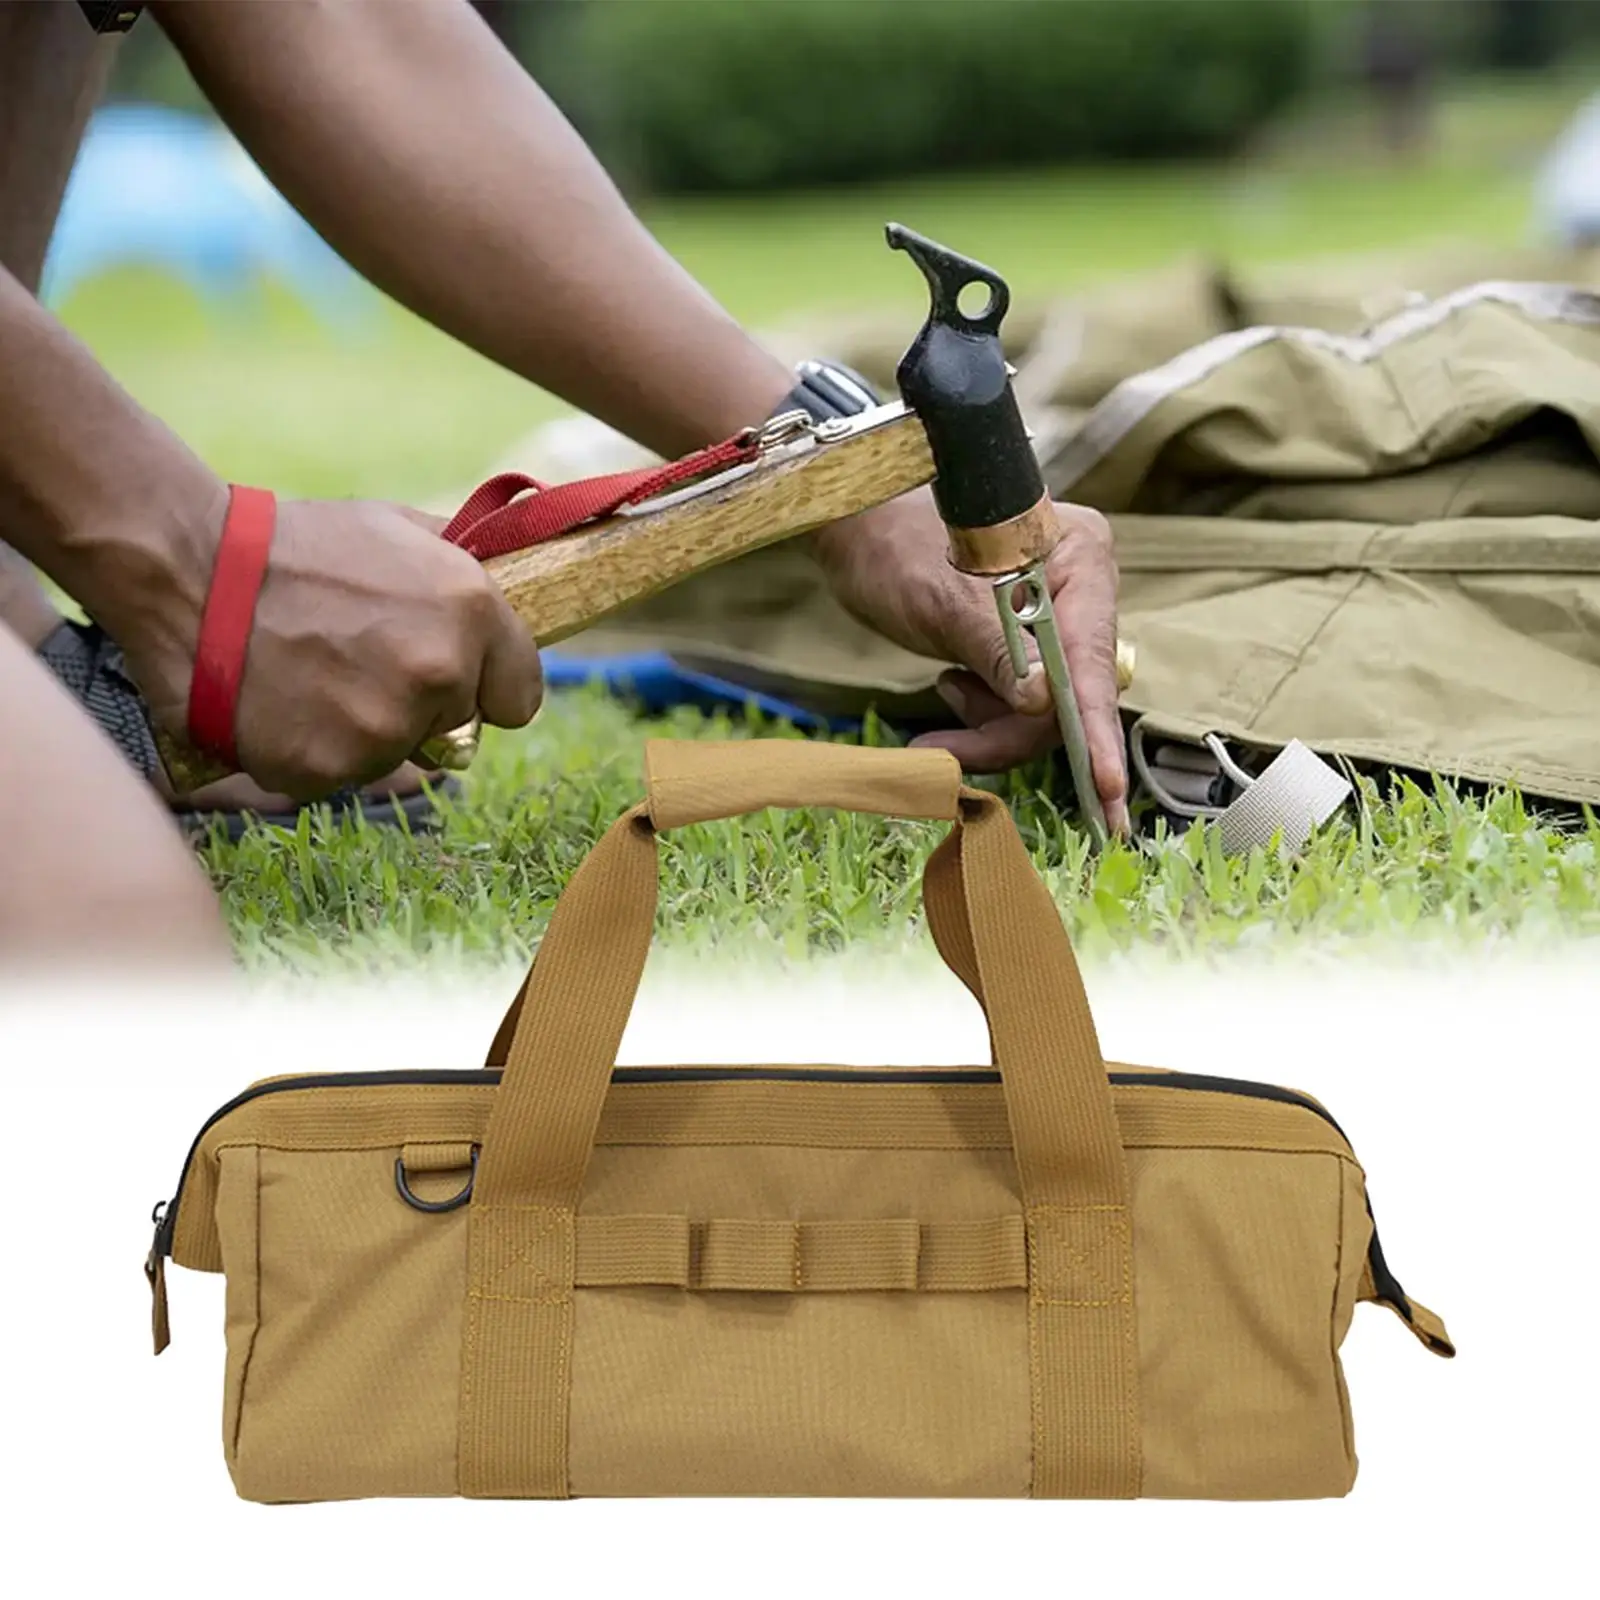 Tent Stakes Storage Bag Durable with Handle Carrier Utility Tote Bag Tent Pegs Pouch for Hiking Work Gardening Camp Tarp